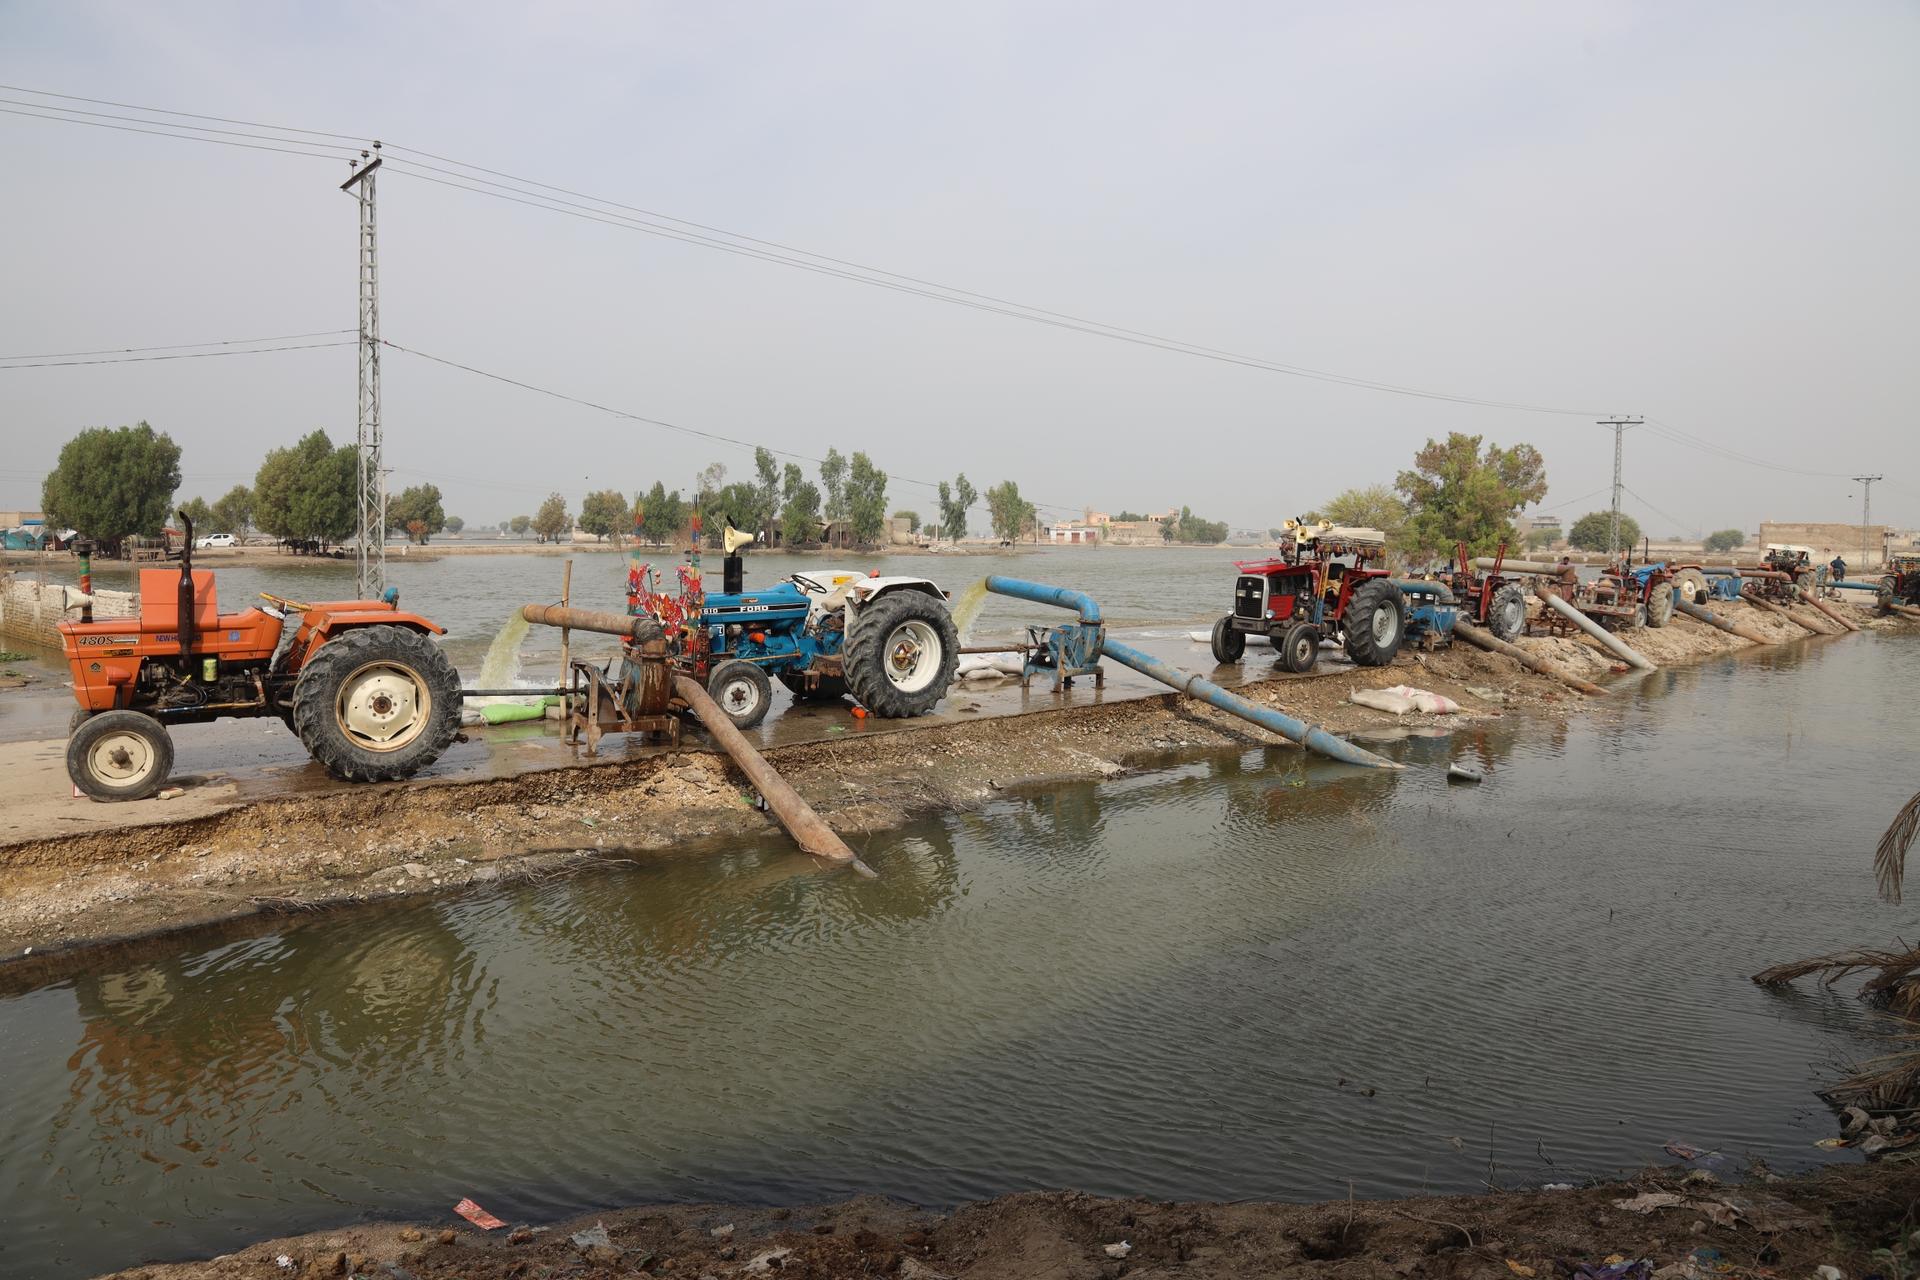 Pumps powered by tractor engines work to “de-water” flooded towns in Pakistan.